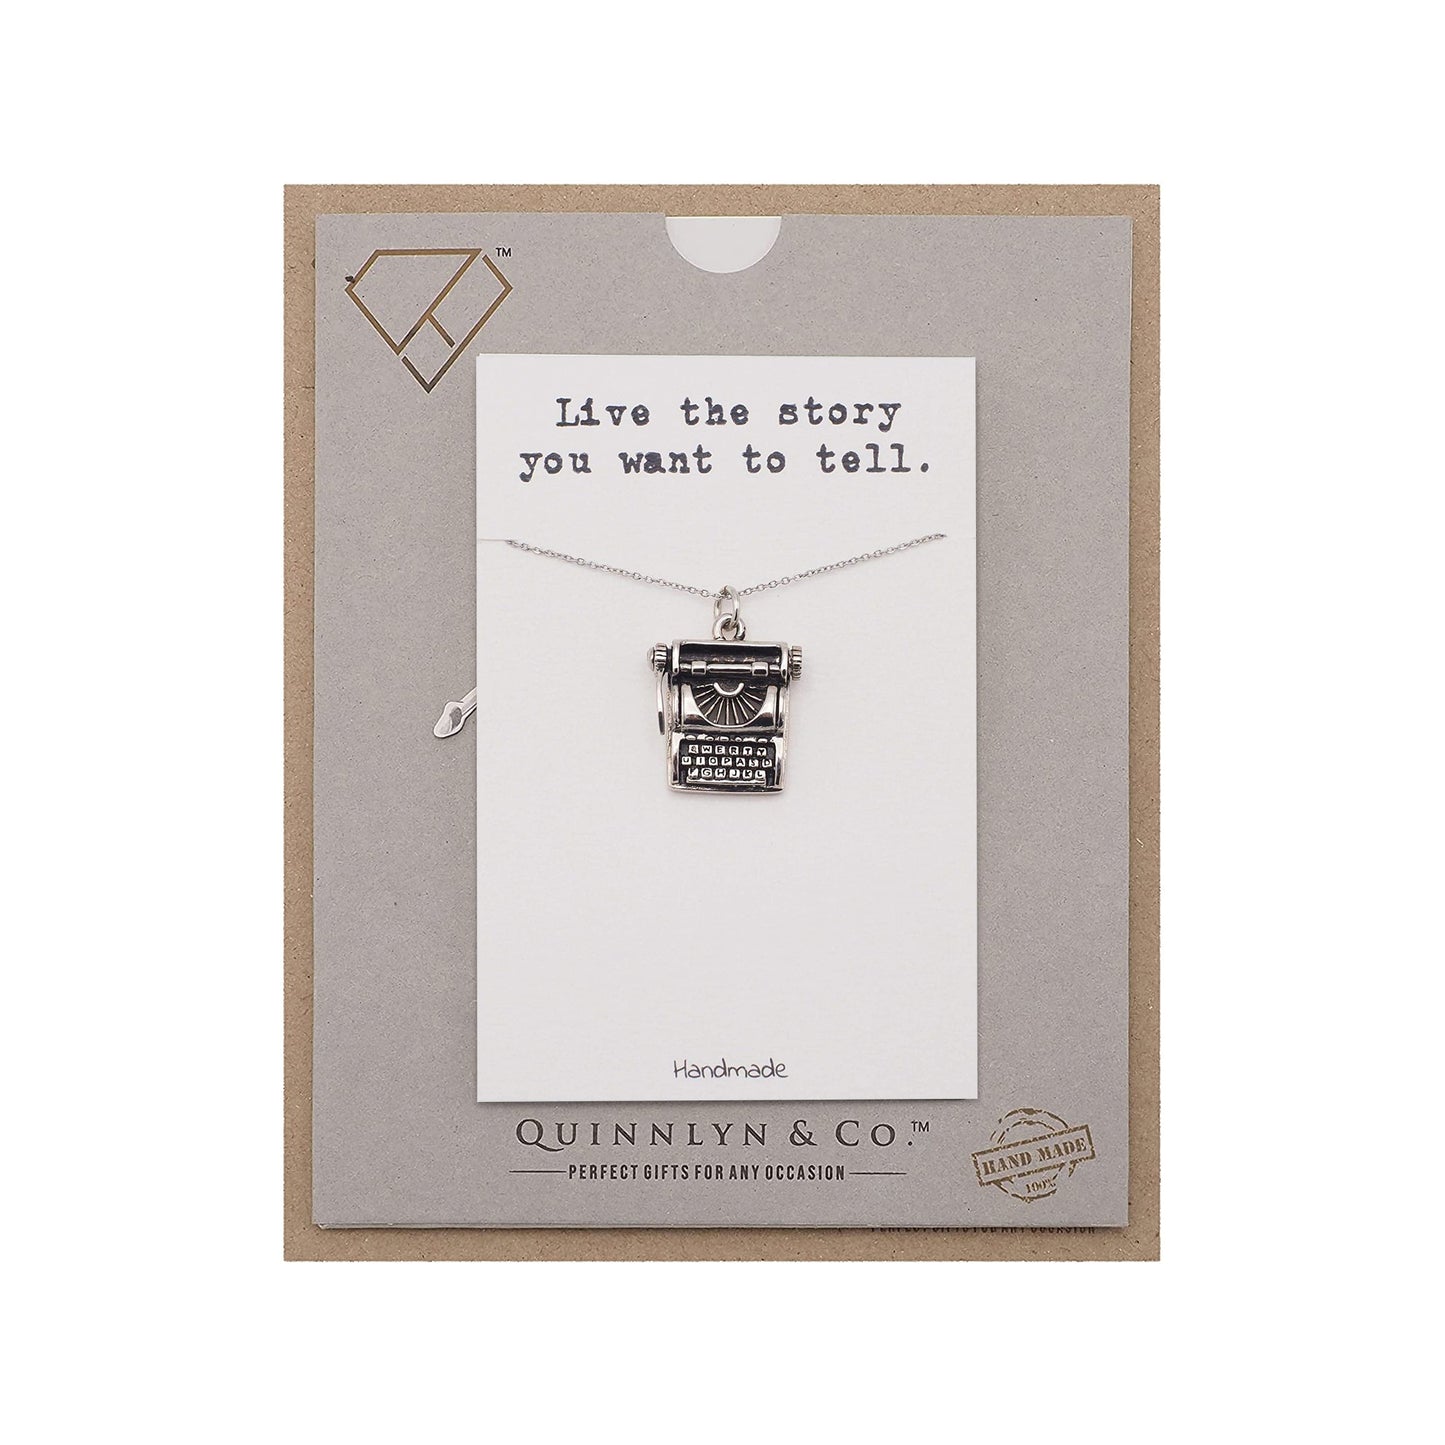 Quinnlyn & Co. Typewriter Pendant Necklace, Birthday Gifts for Women with Inspirational Quote on Greeting Card